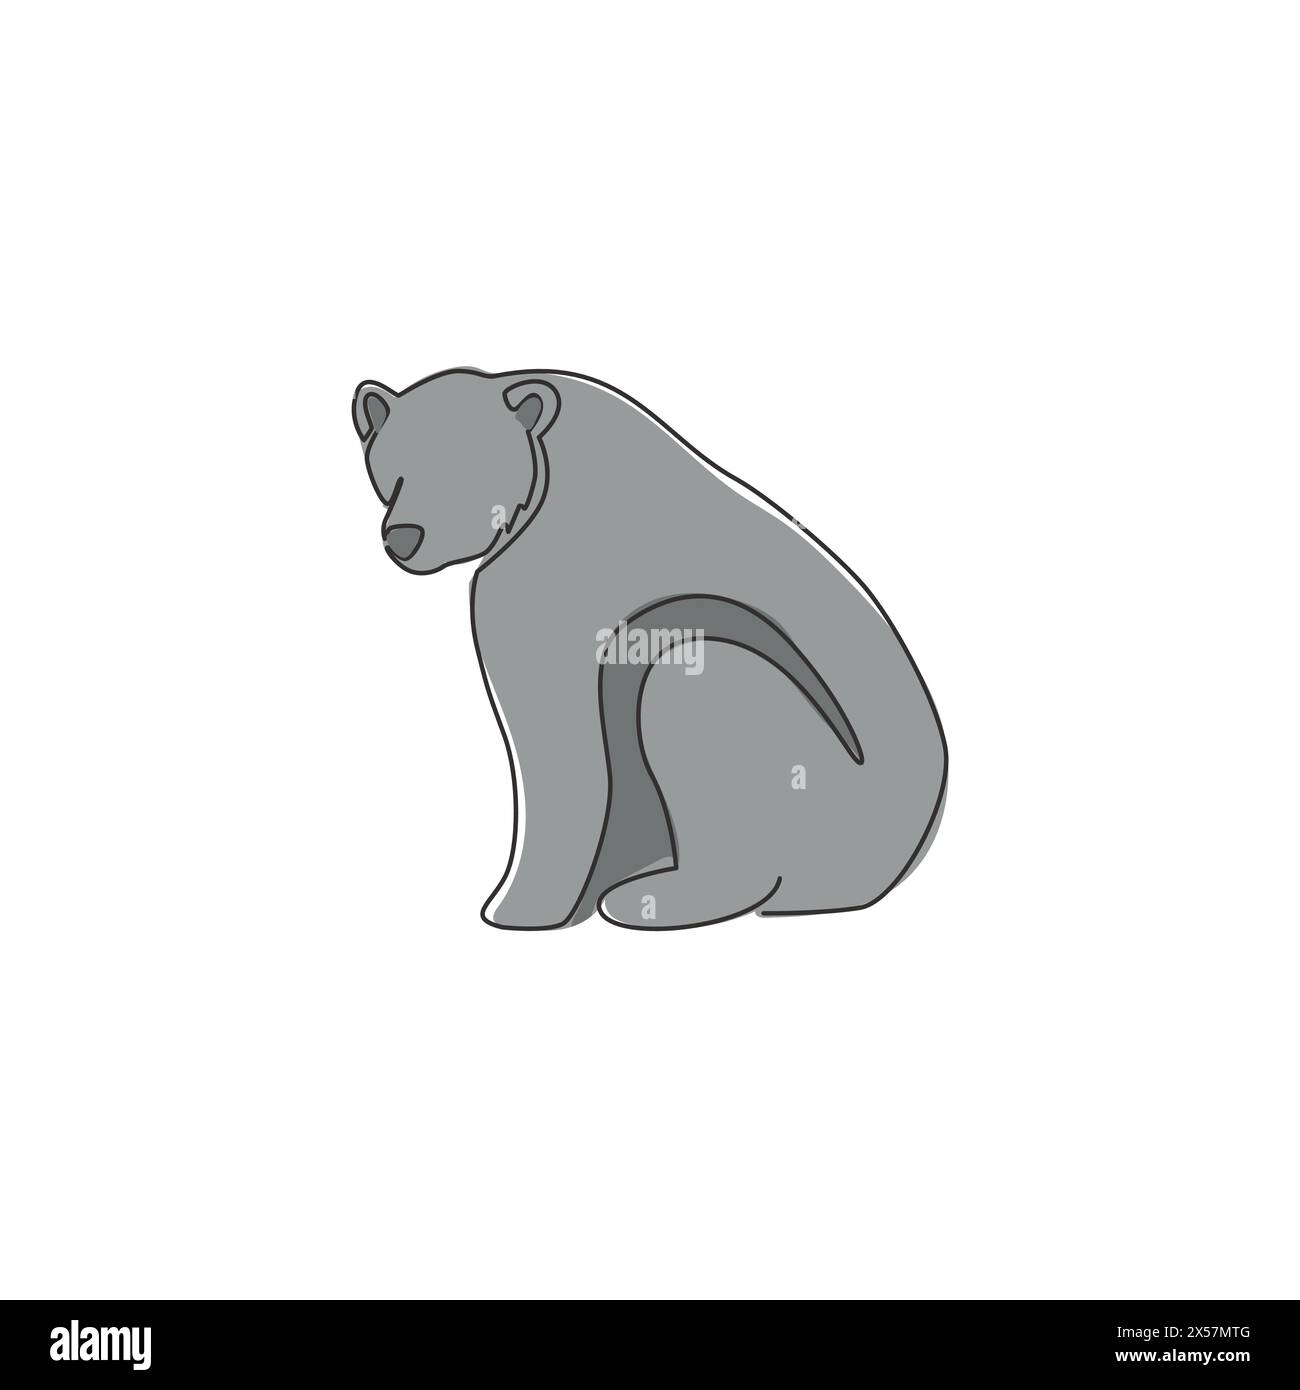 One single line drawing of cute grizzly bear for company logo identity. Business corporation icon concept from wild mammal animal shape. Modern contin Stock Vector